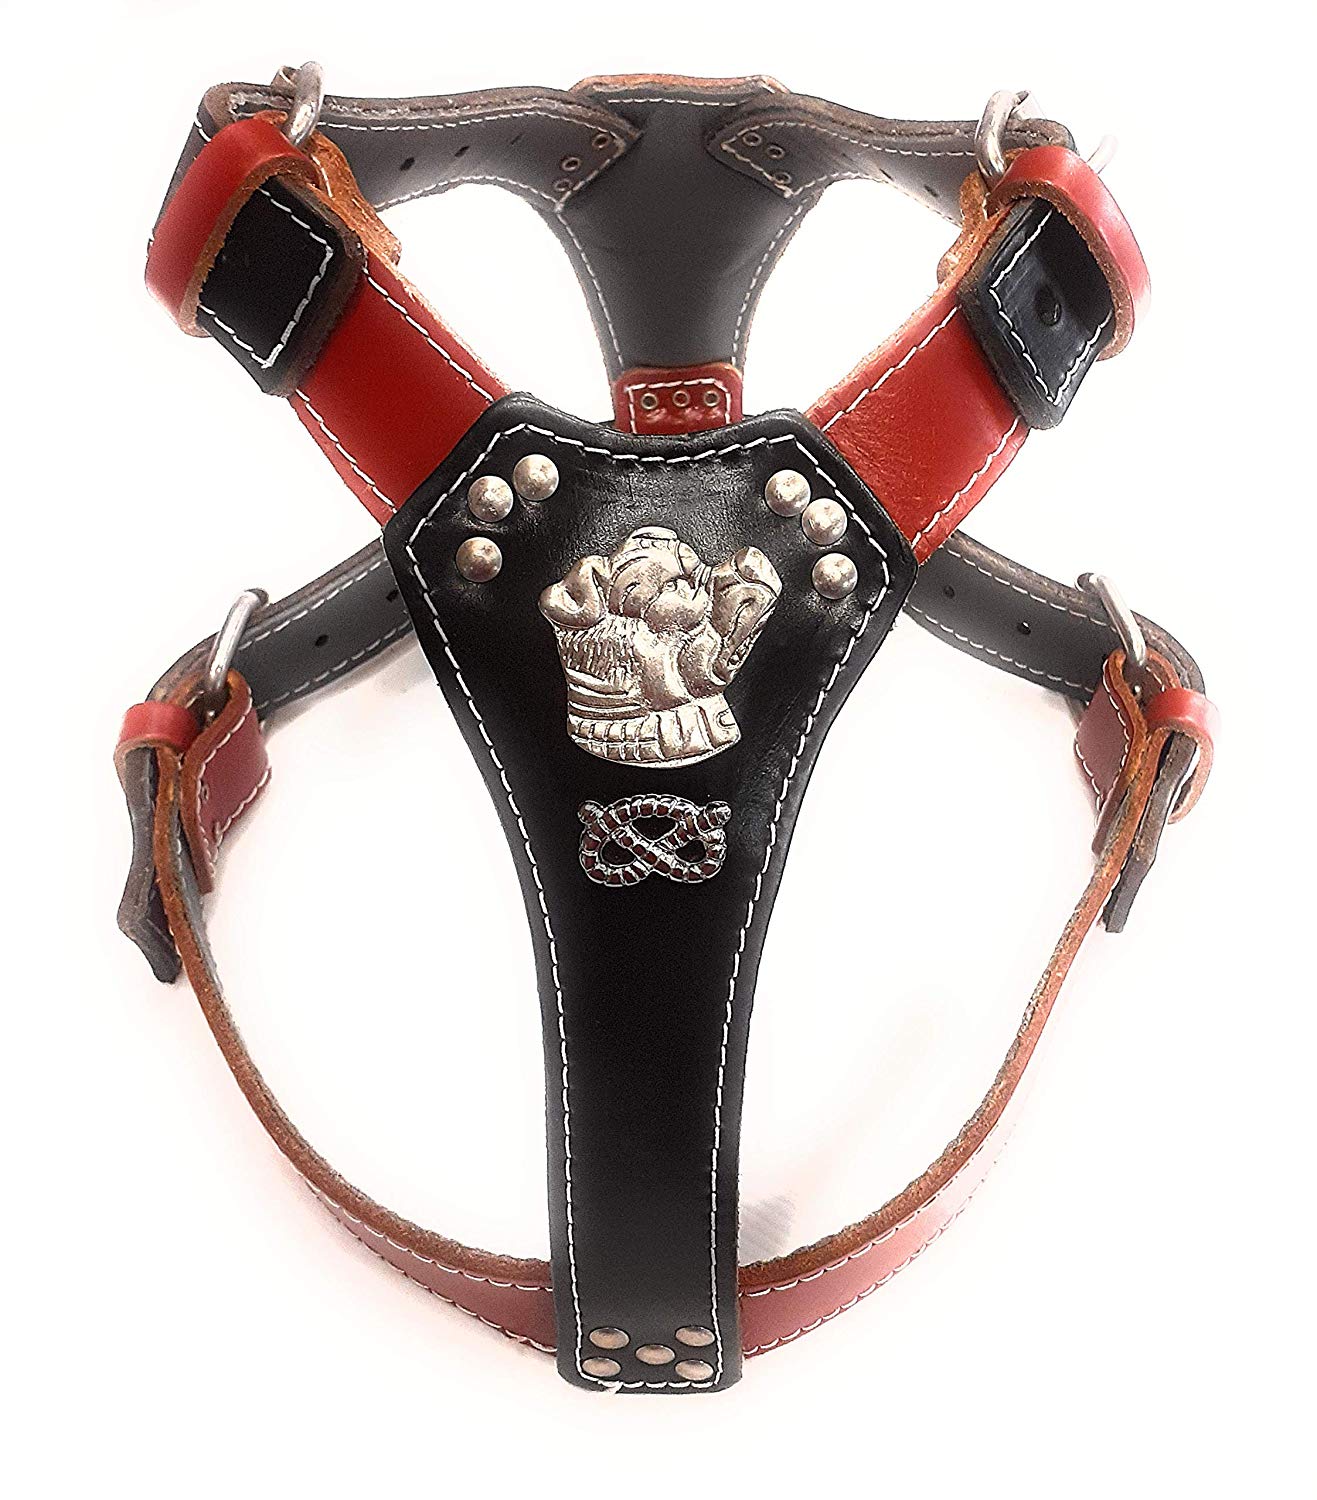 Two Tone Black / Red Leather Dog Harness with Staffordshire Bullterrier Head Motif & Knot